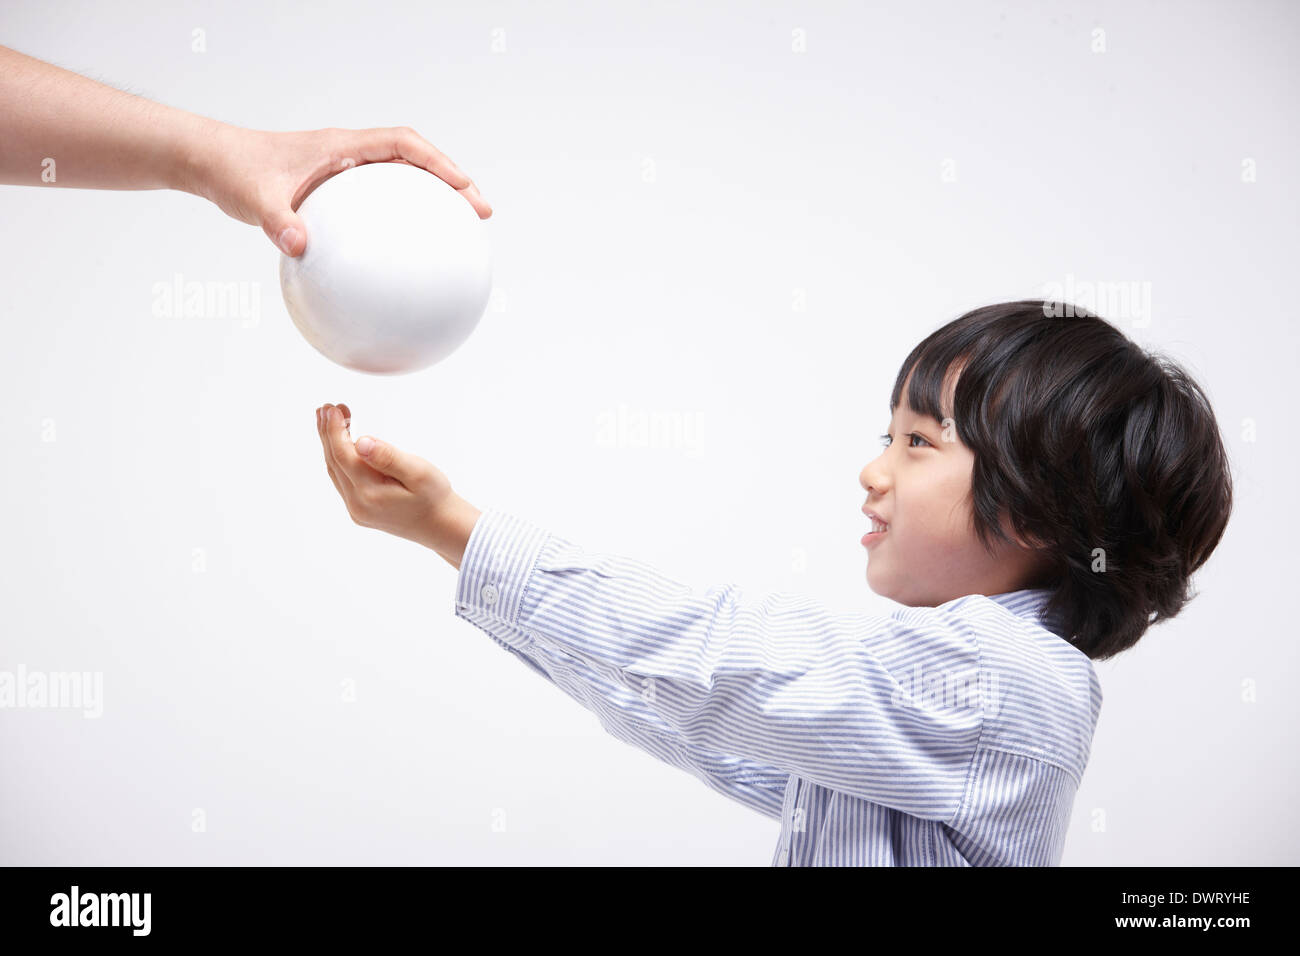 a kid receiving a ball in white background Stock Photo